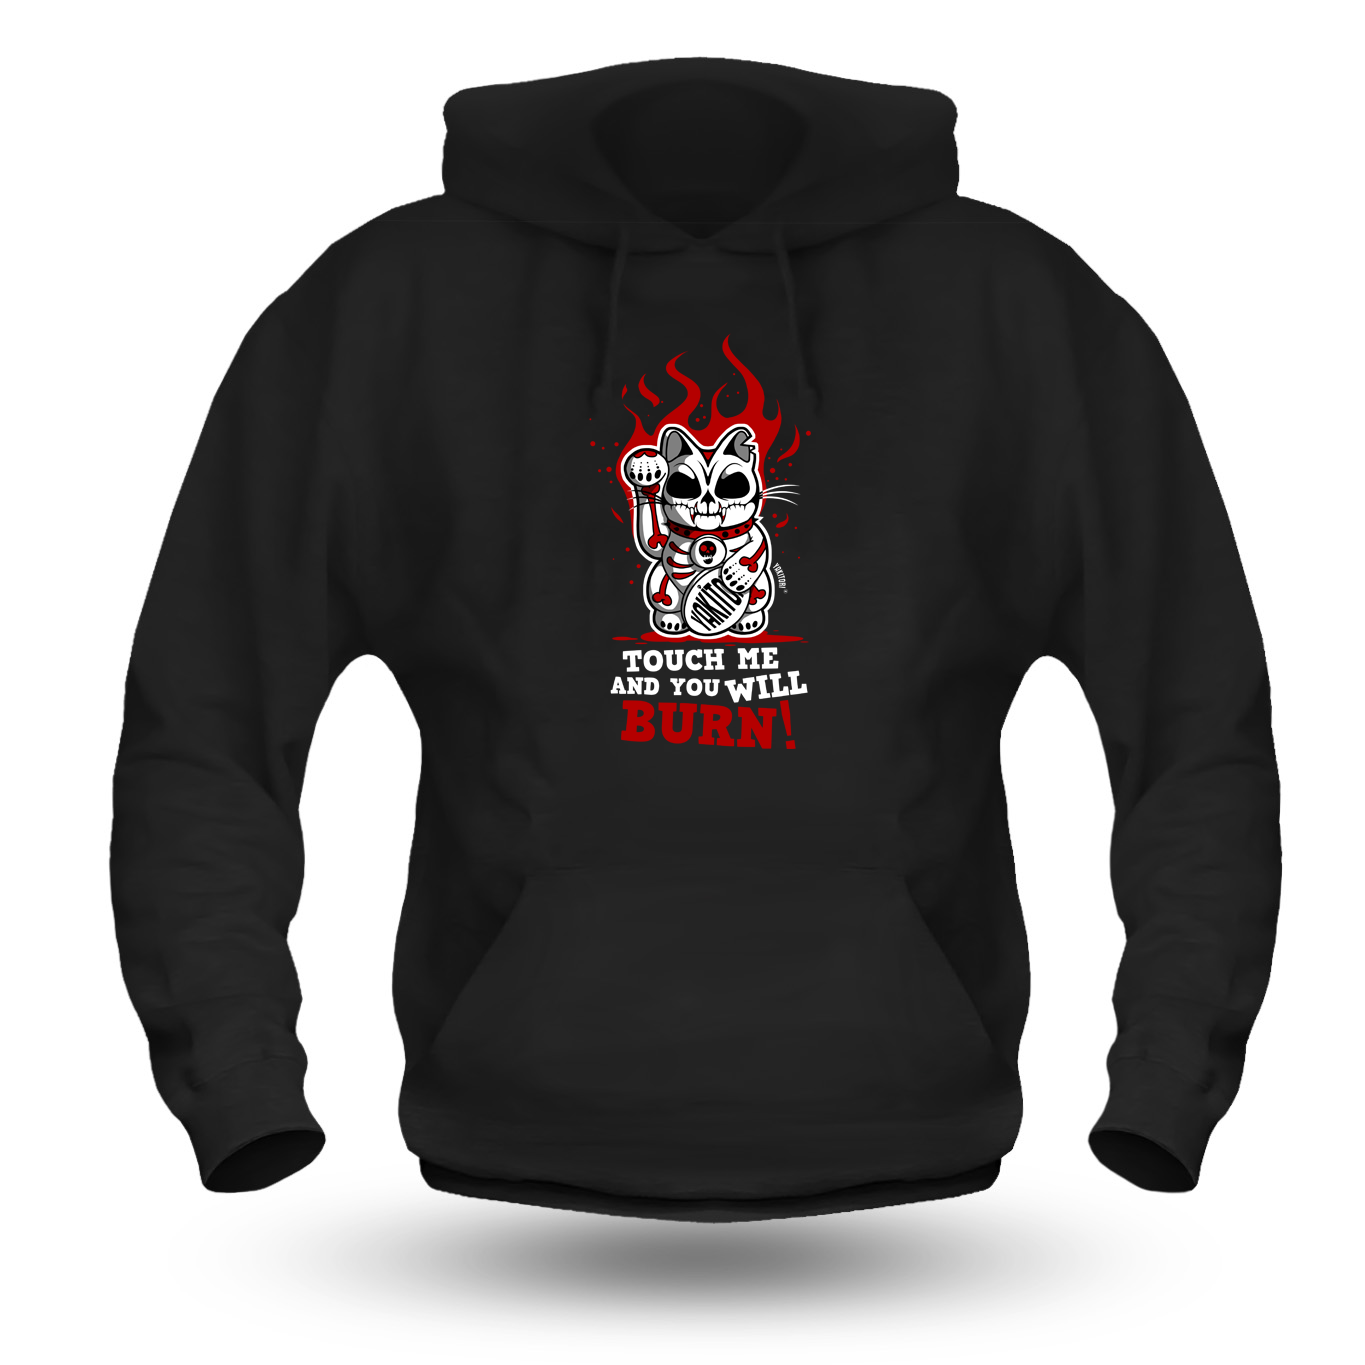 Touch me and you will burn - Hoody